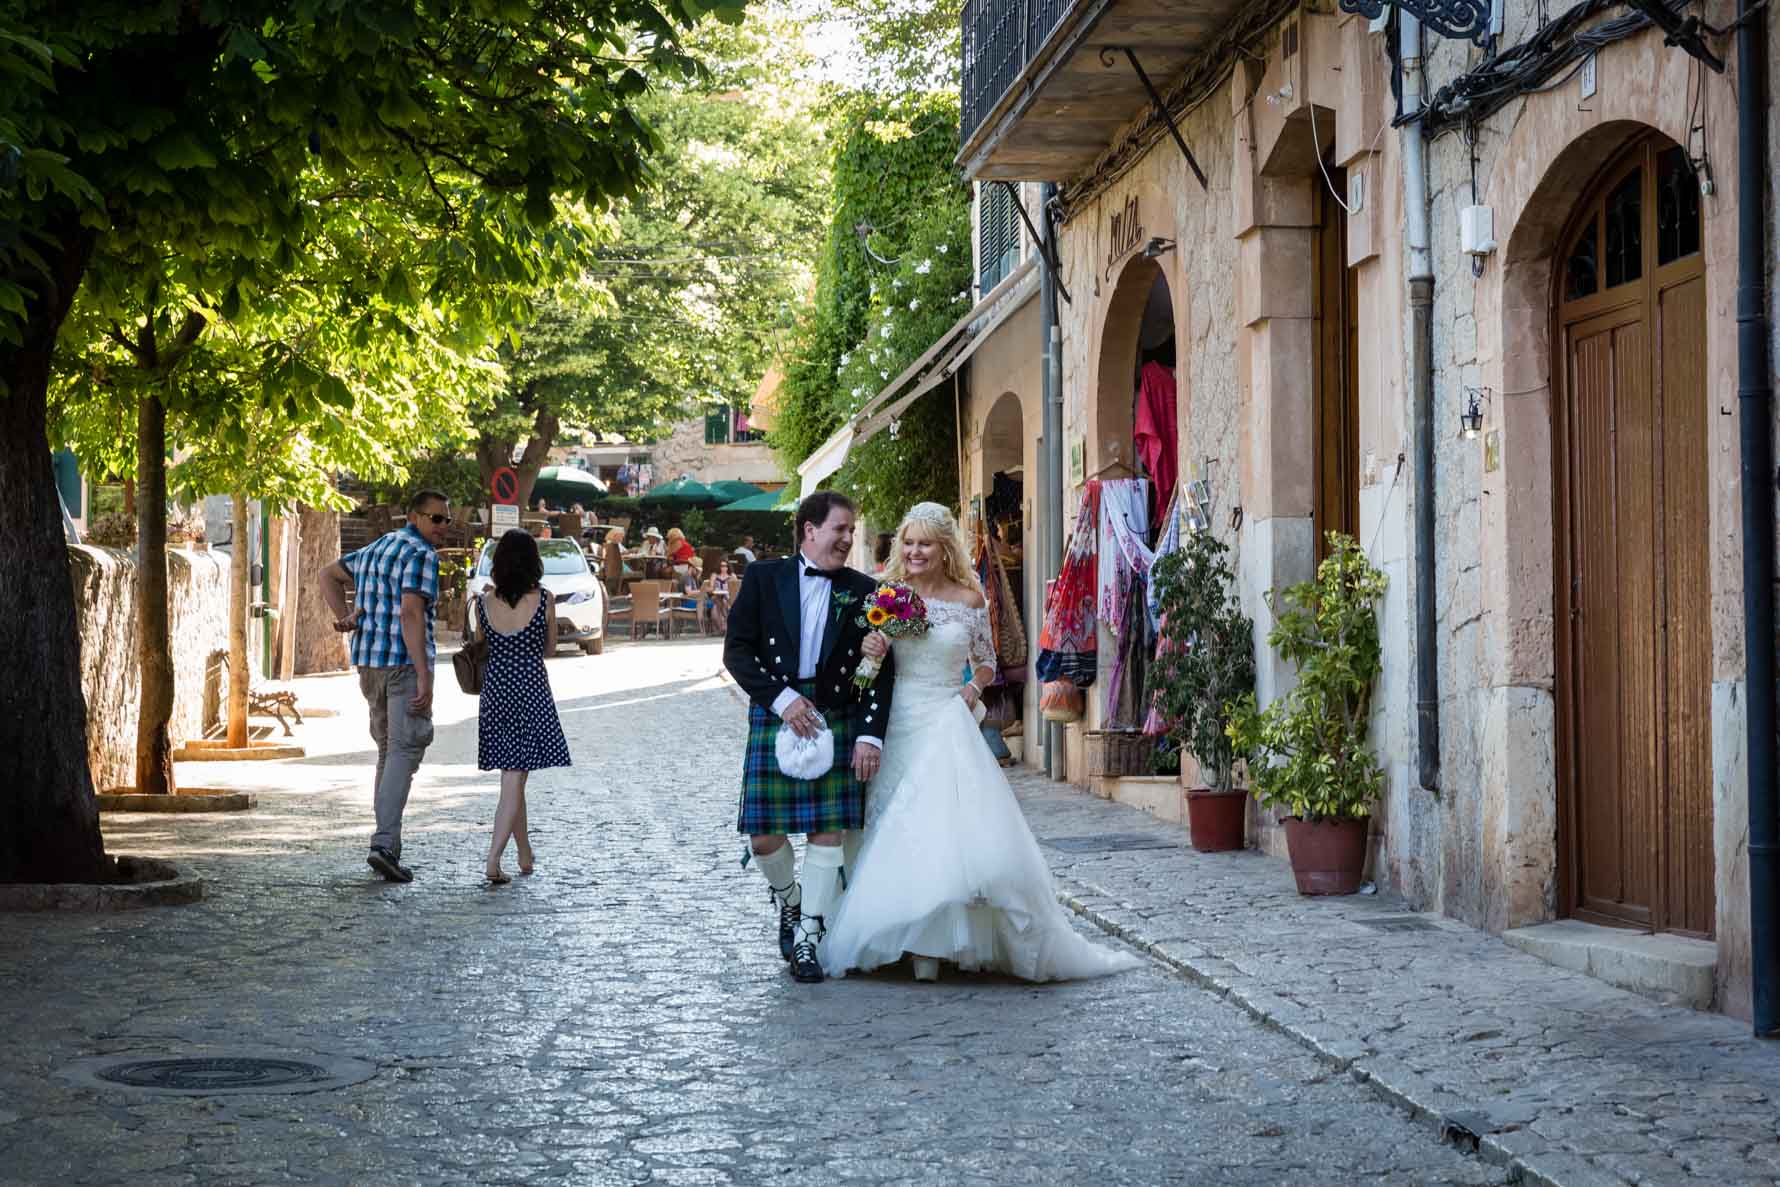 Bride and groom having fun in the Valldemossa streets